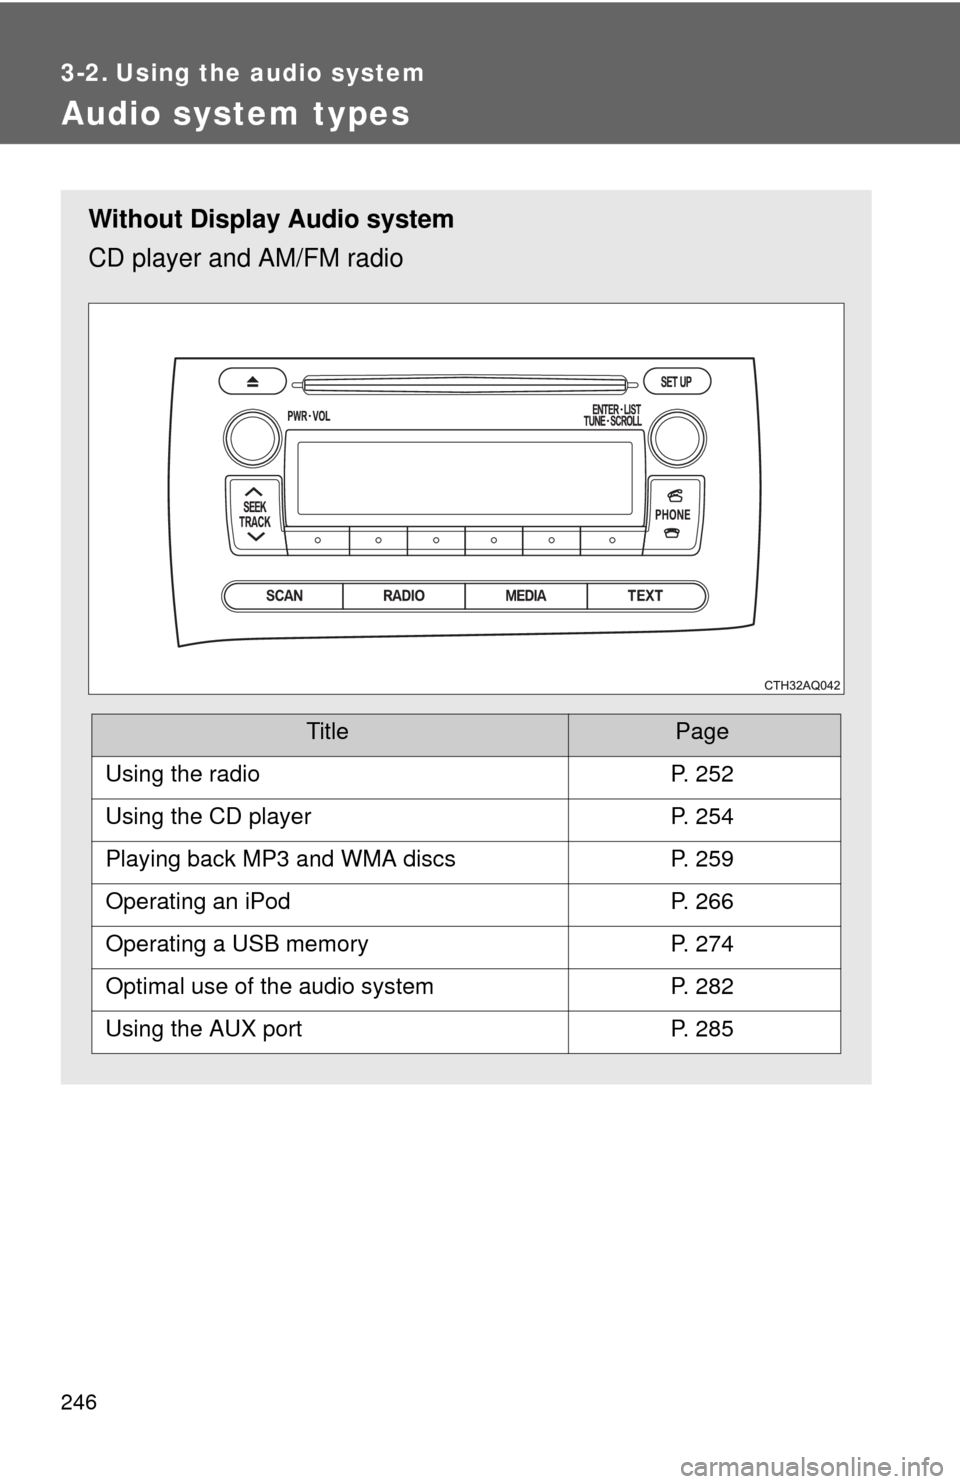 TOYOTA PRIUS C 2013 NHP10 / 1.G Owners Manual 246
3-2. Using the audio system
Audio system types
Without Display Audio system
CD player and AM/FM radio
TitlePage
Using the radioP. 252
Using the CD playerP. 254
Playing back MP3 and WMA discsP. 259